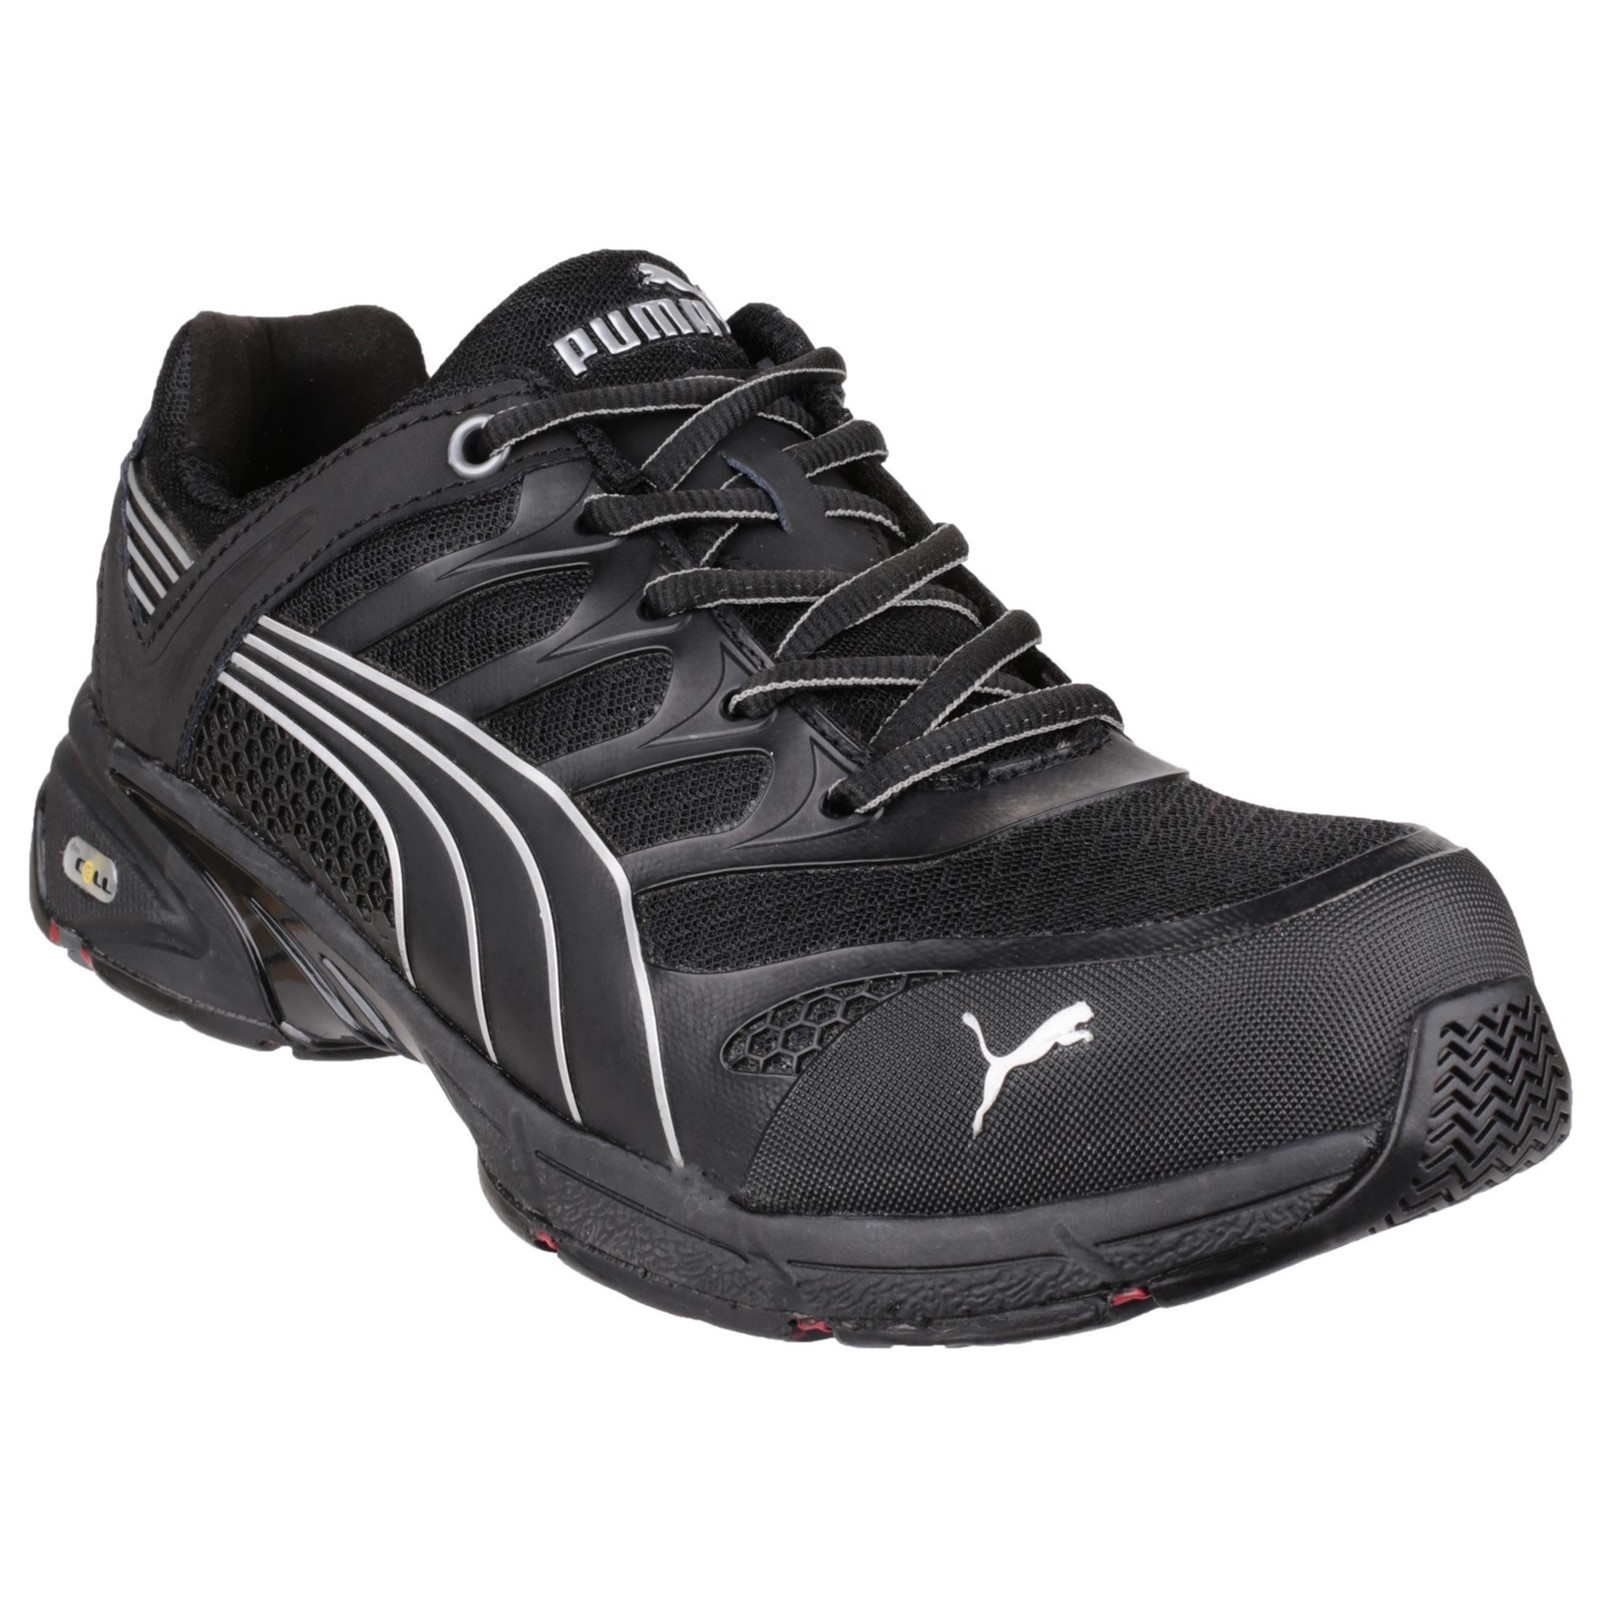 Fuse Motion Low Safety Shoe